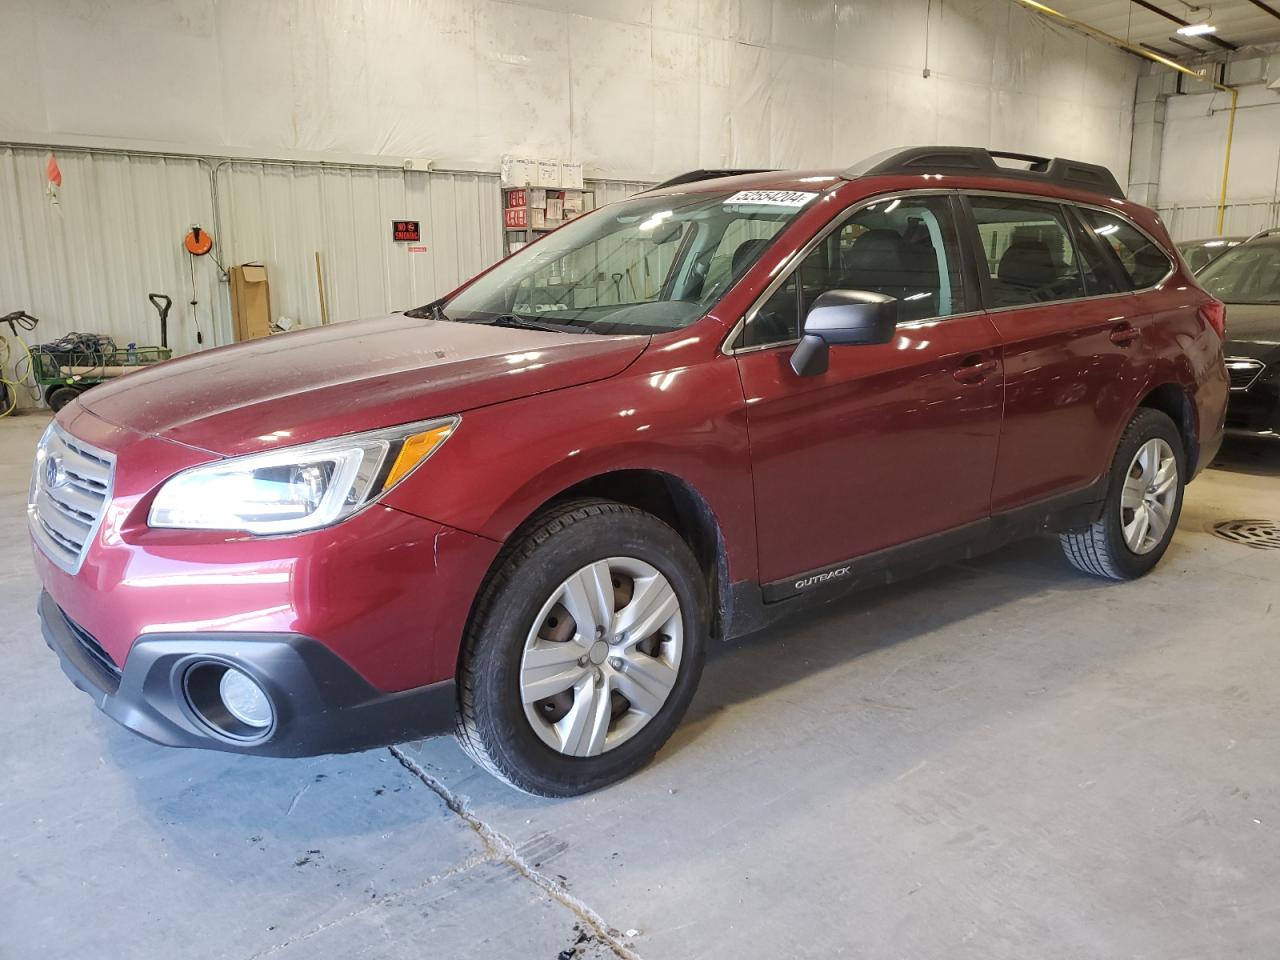 VIN: 4S4BSBAC0F3254401 - subaru outback